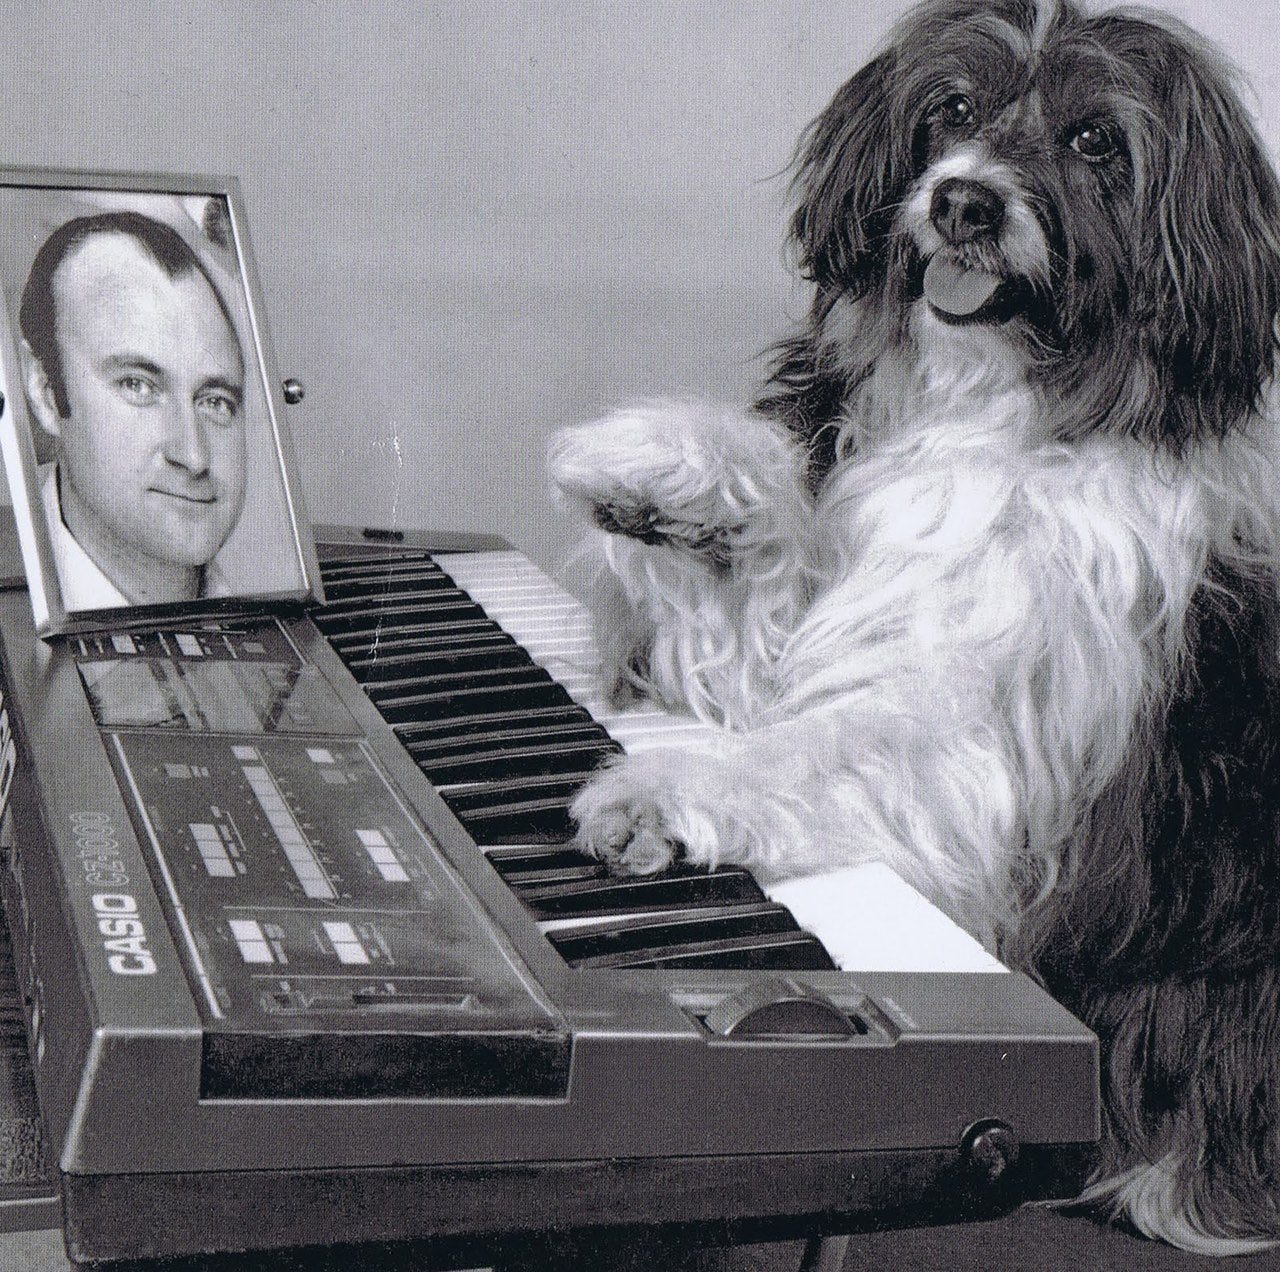 Pippin the dog sits in front of a keyboard with a picture of Phil Collins mounted atop the keyboard. 